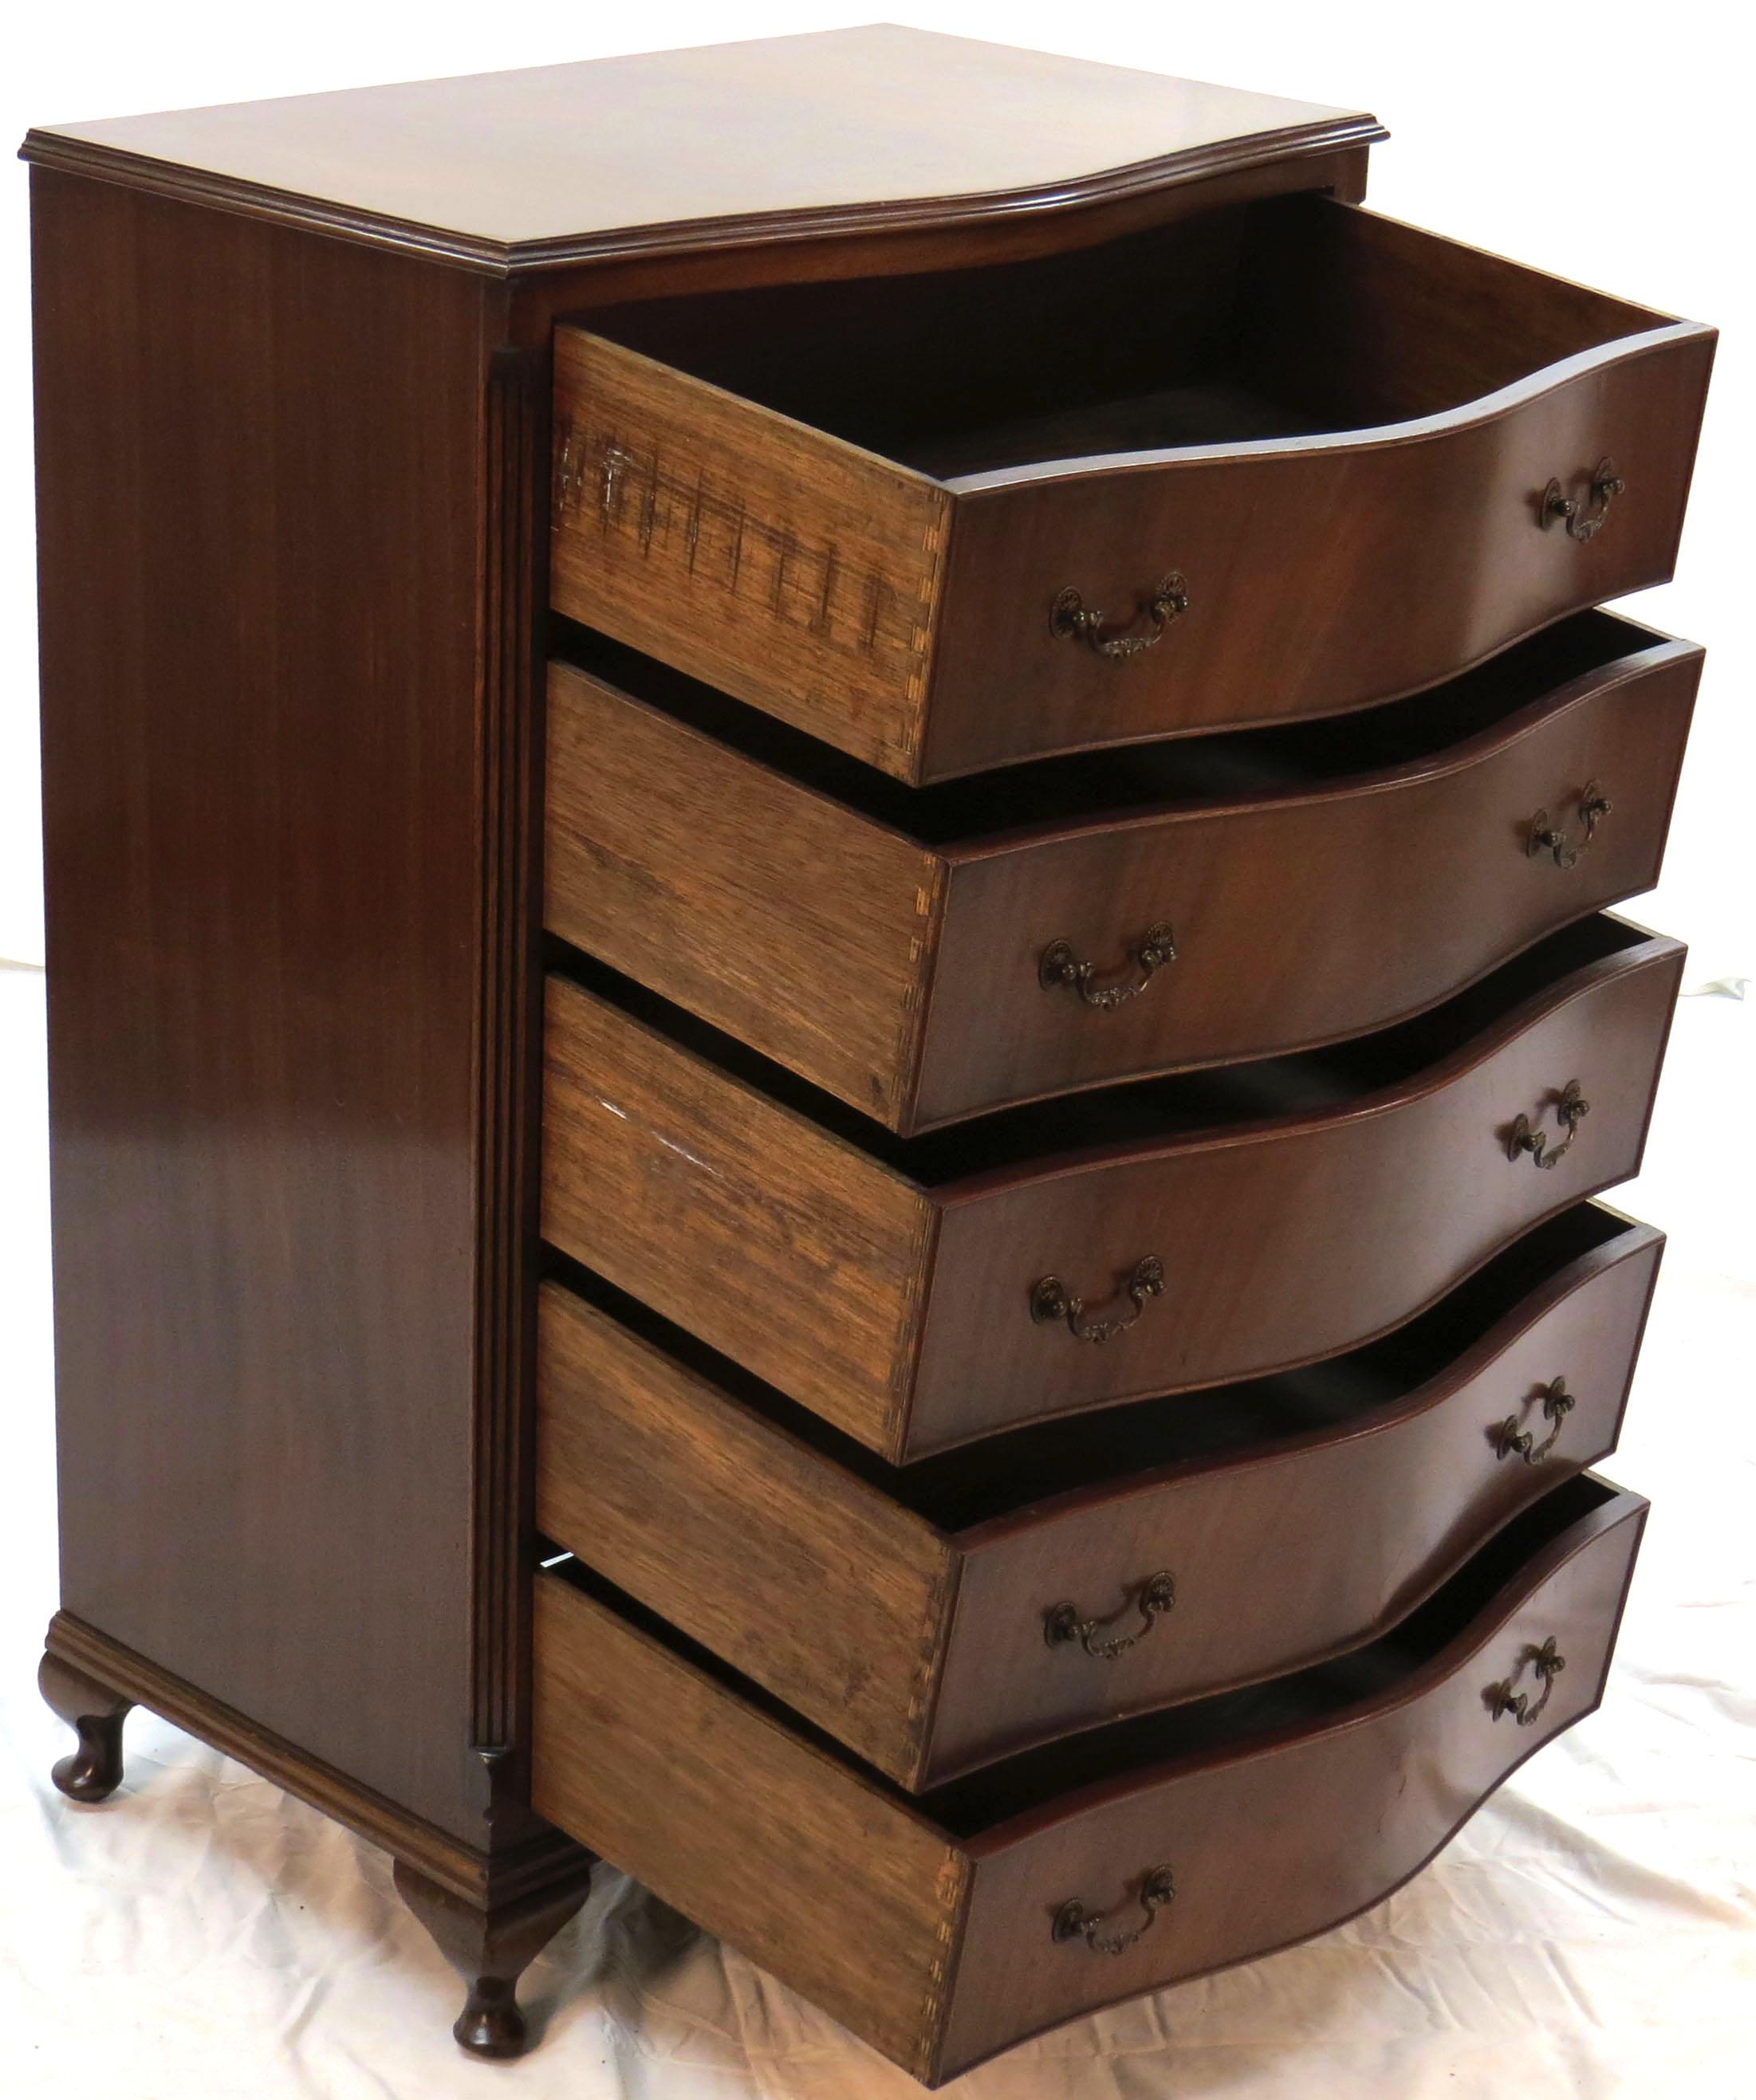 Walnut Bow Front Queen Anne Style Lingerie Chest of Drawers Dresser 2